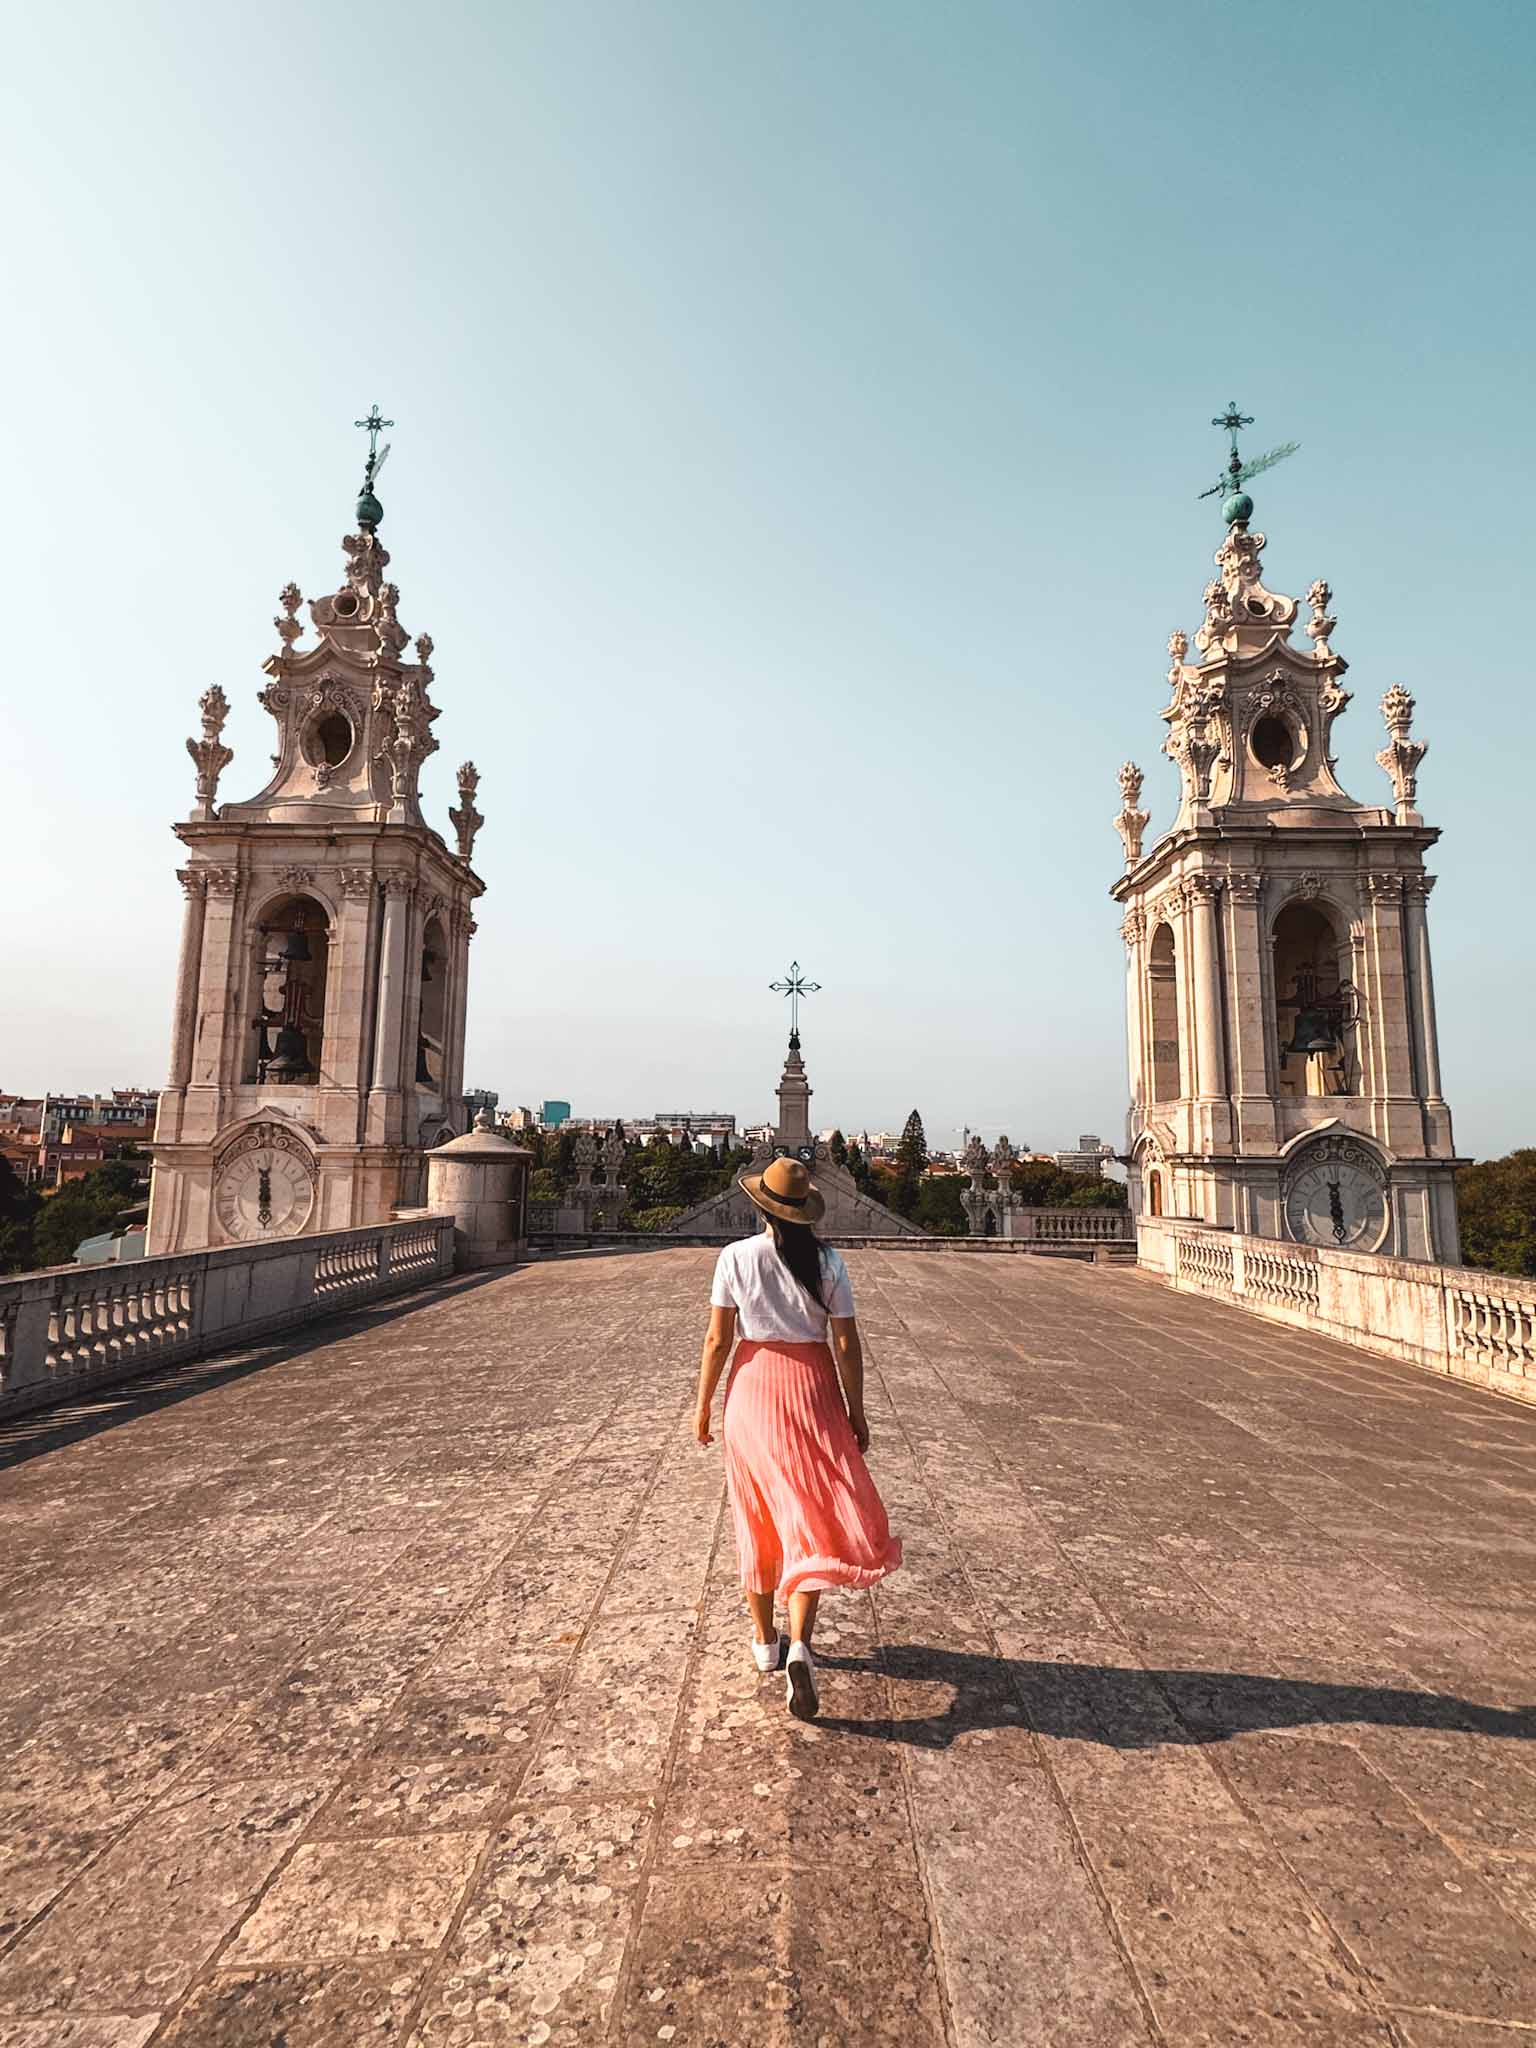 Best viewpoints and rooftops in Lisbon - Basílica of Estrela